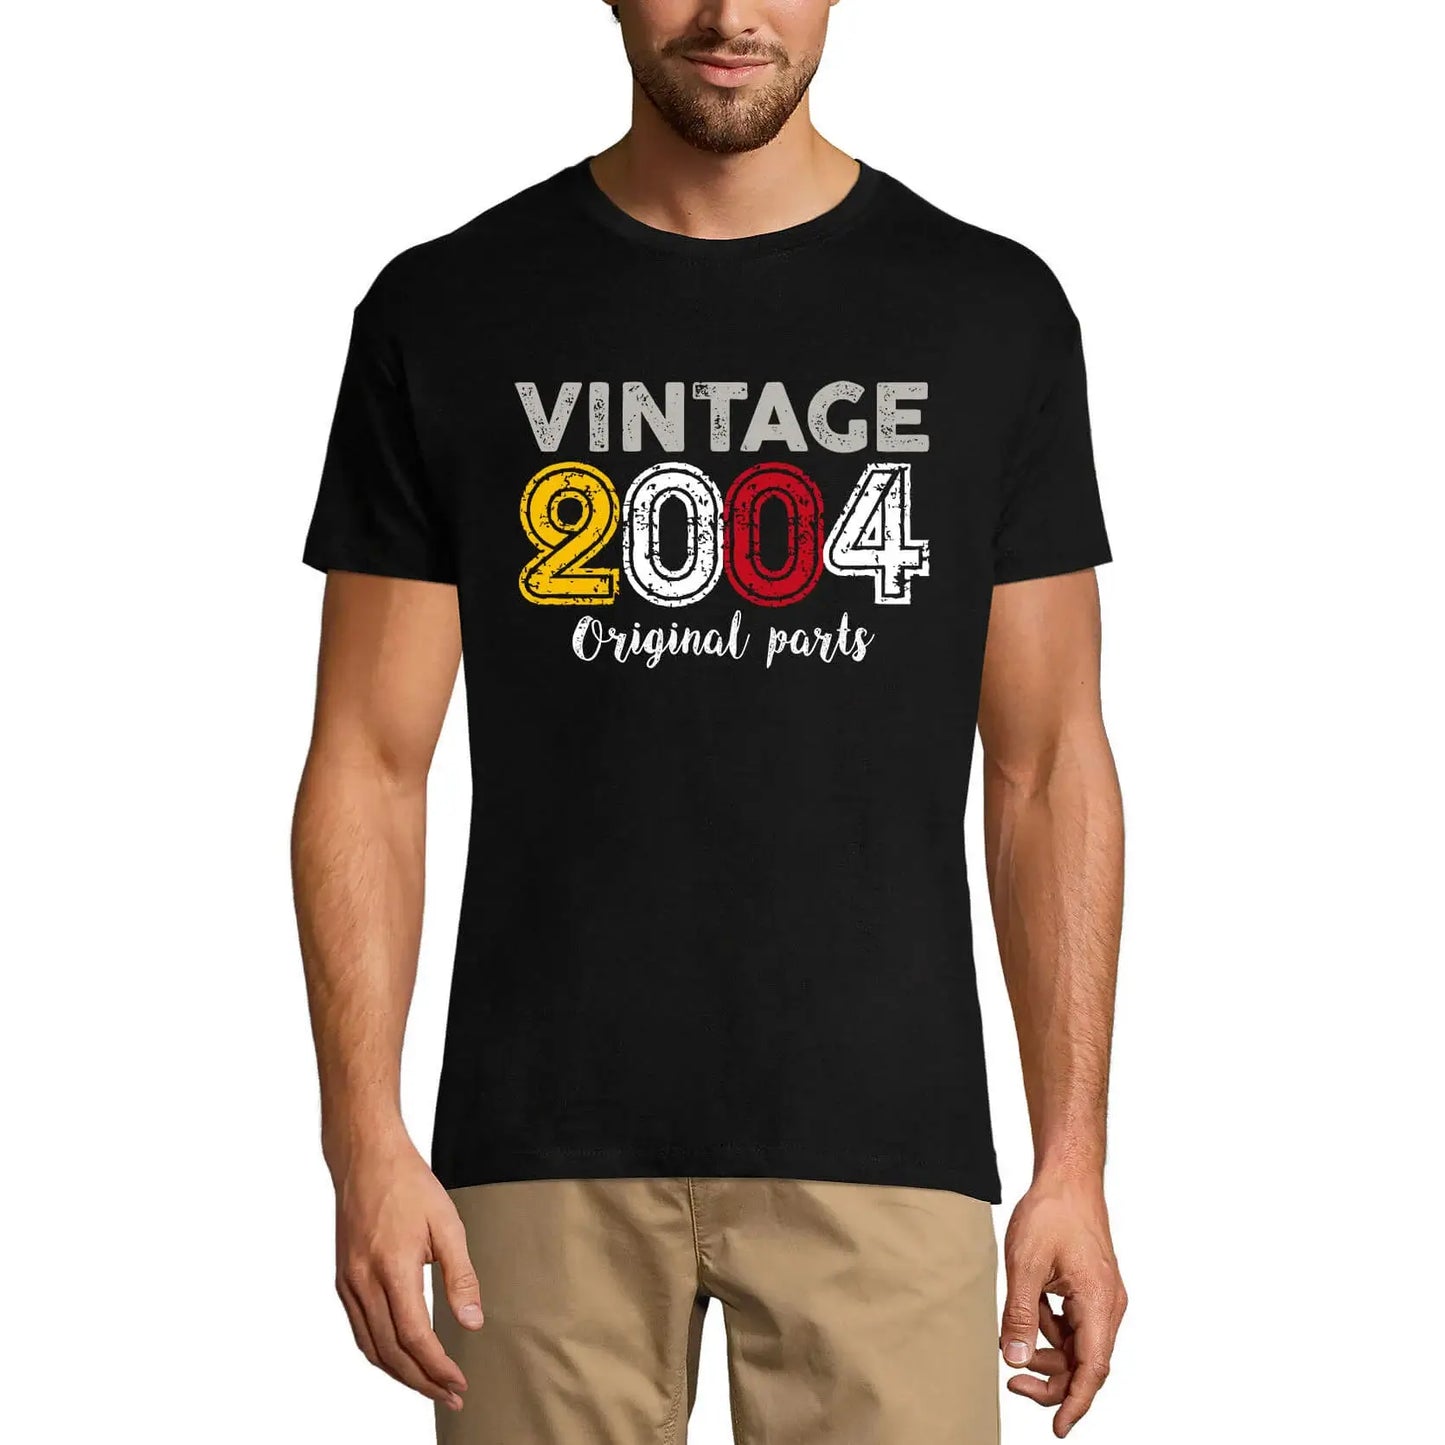 Men's Graphic T-Shirt Original Parts 2004 20th Birthday Anniversary 20 Year Old Gift 2004 Vintage Eco-Friendly Short Sleeve Novelty Tee